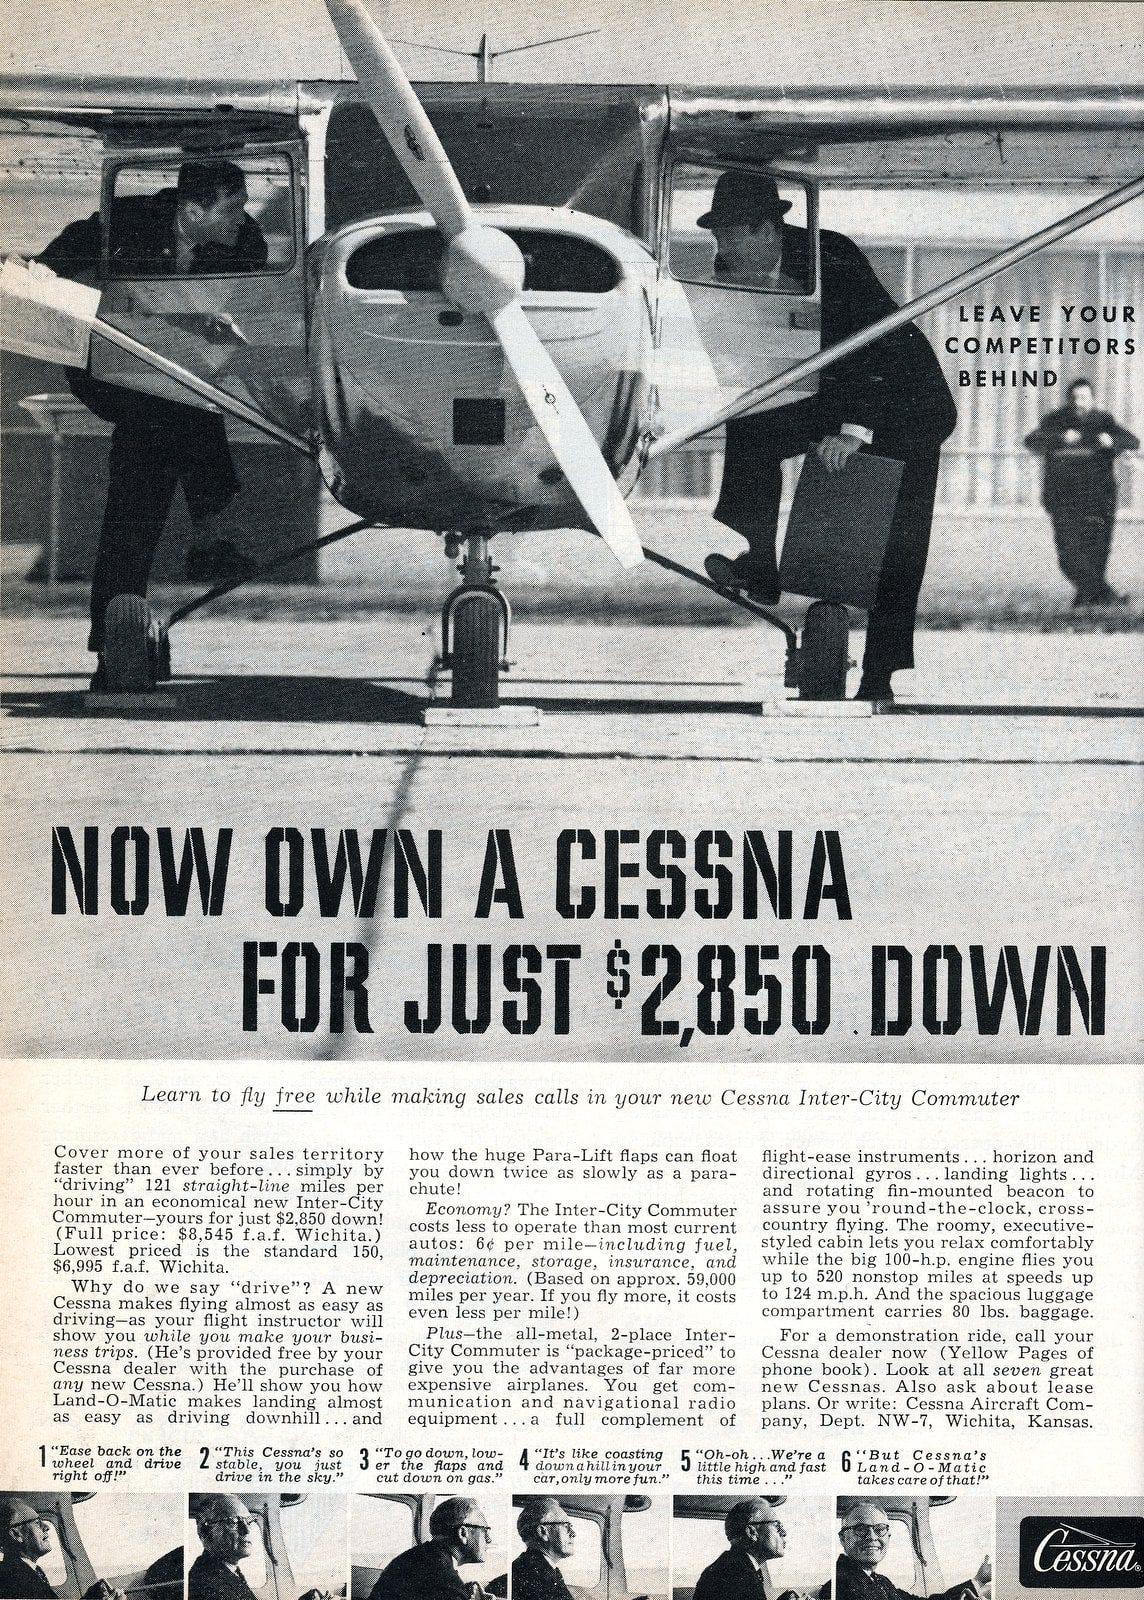 1950s Cessna propeller airplanes (1959)